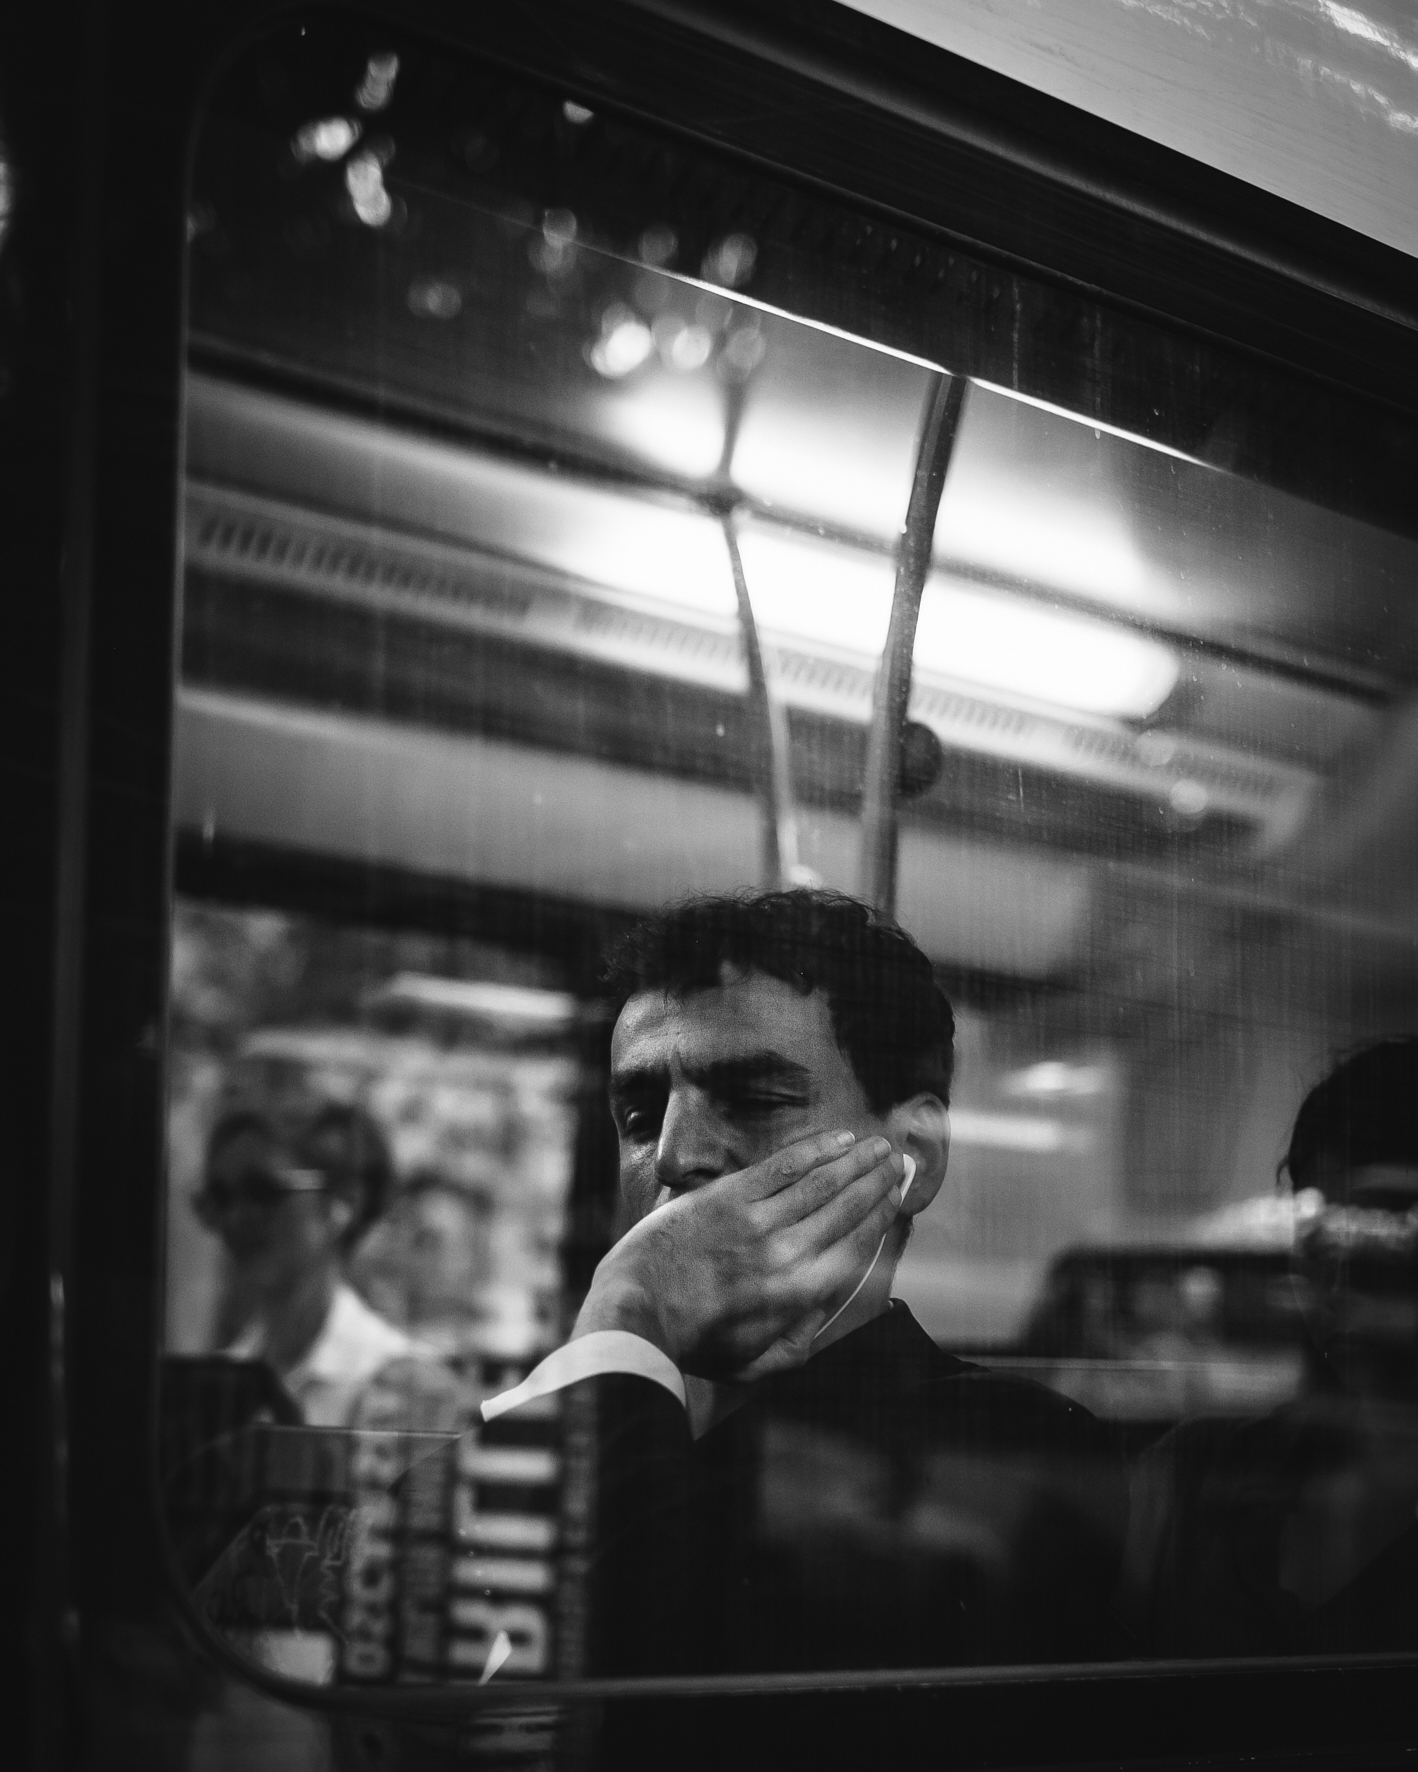 Their Grind, Not Mine: A Photographic Study of Commuters